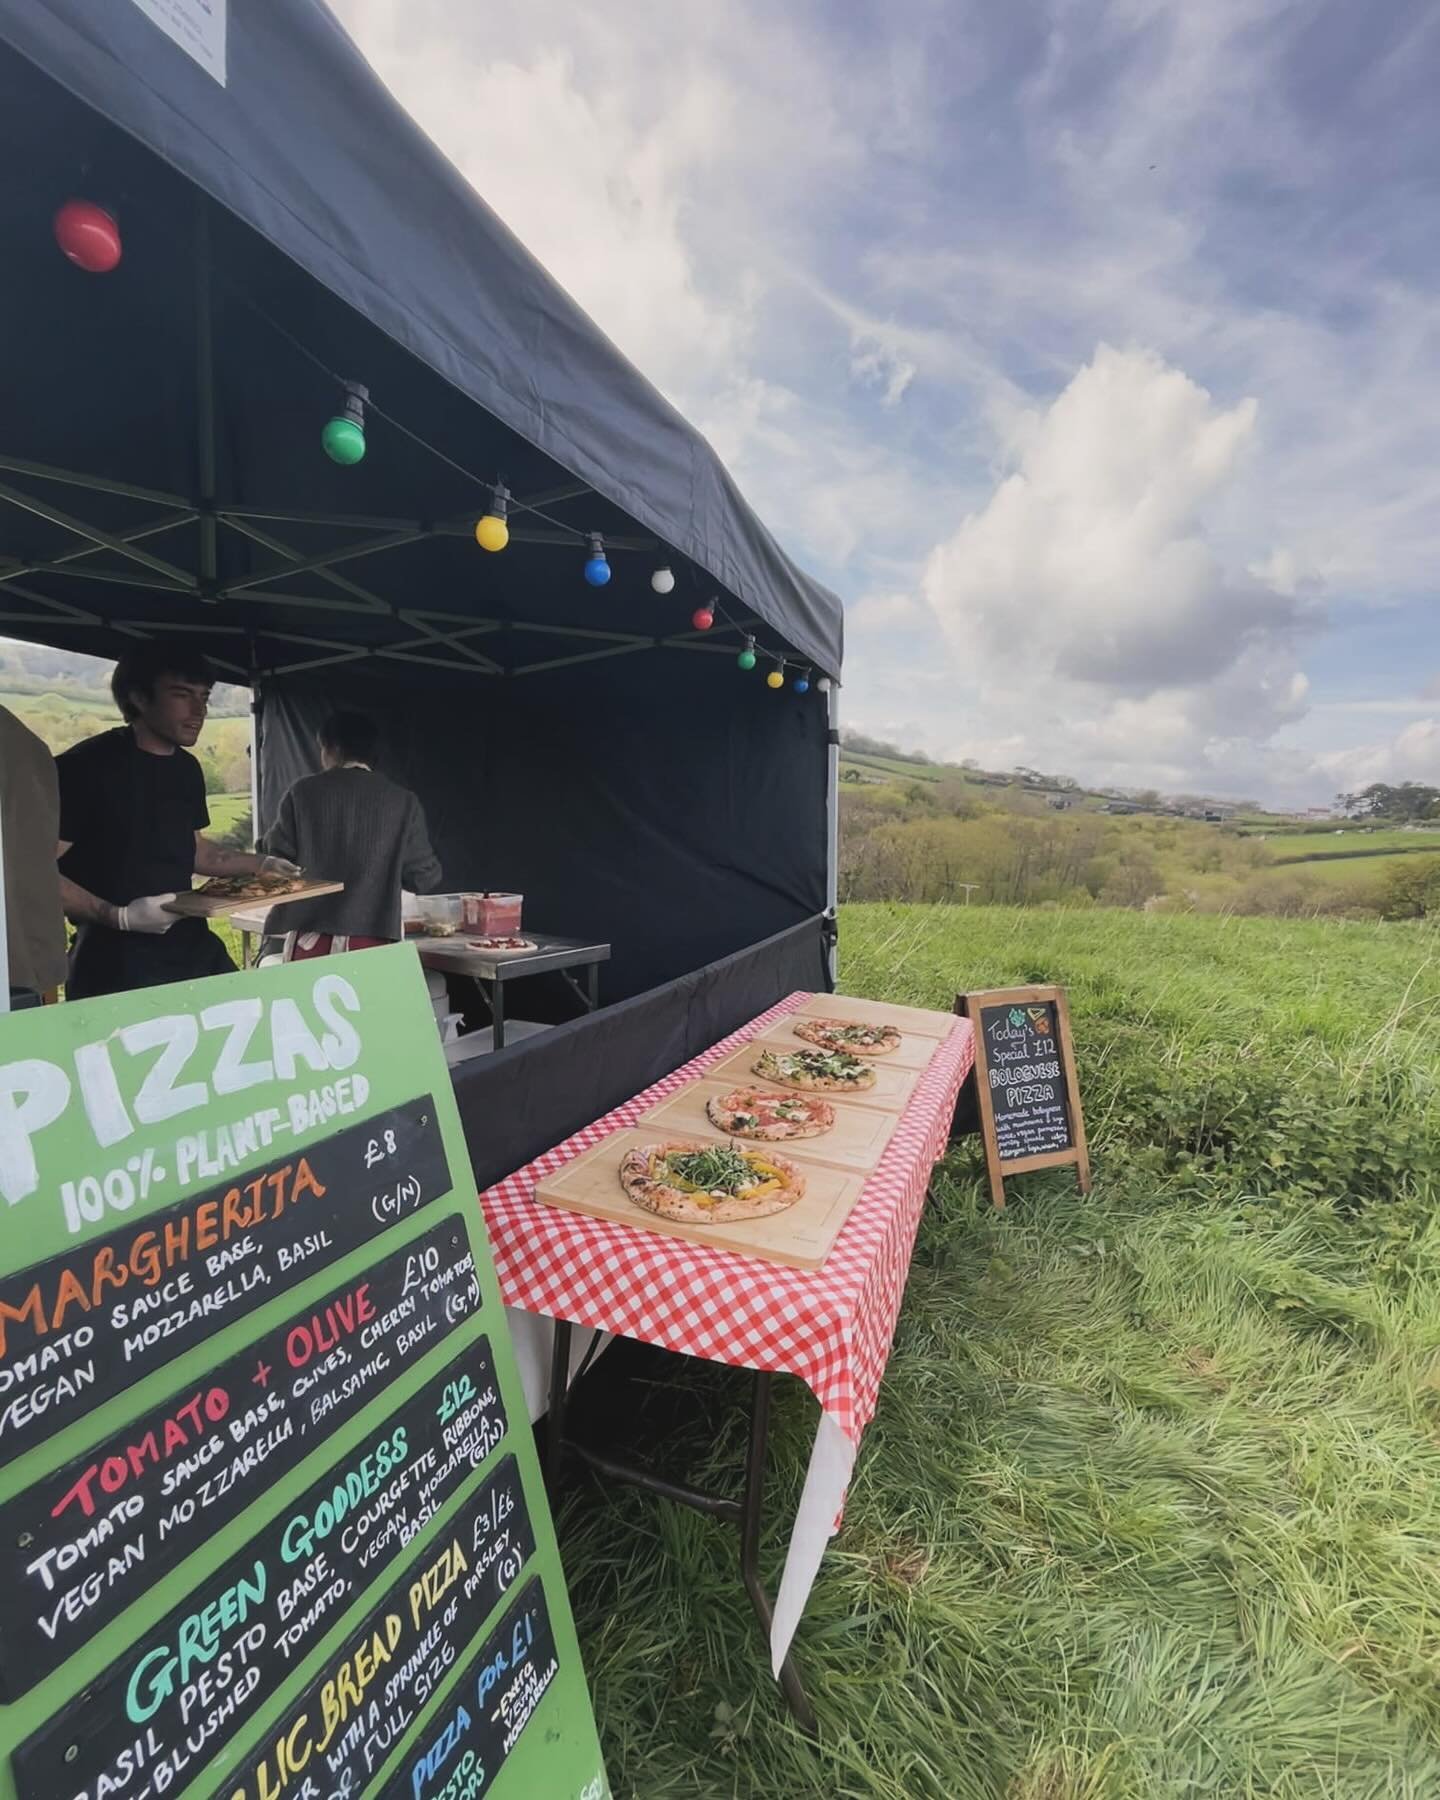 🍷 *THIS SATURDAY * 🍕 
There looks to be a break in the weather at the weekend! So we are celebrating with the woodfired delights of @fireintheshiree 
We will be serving up the usual offering of real wine, craft beer and a smattering of sunshine alo